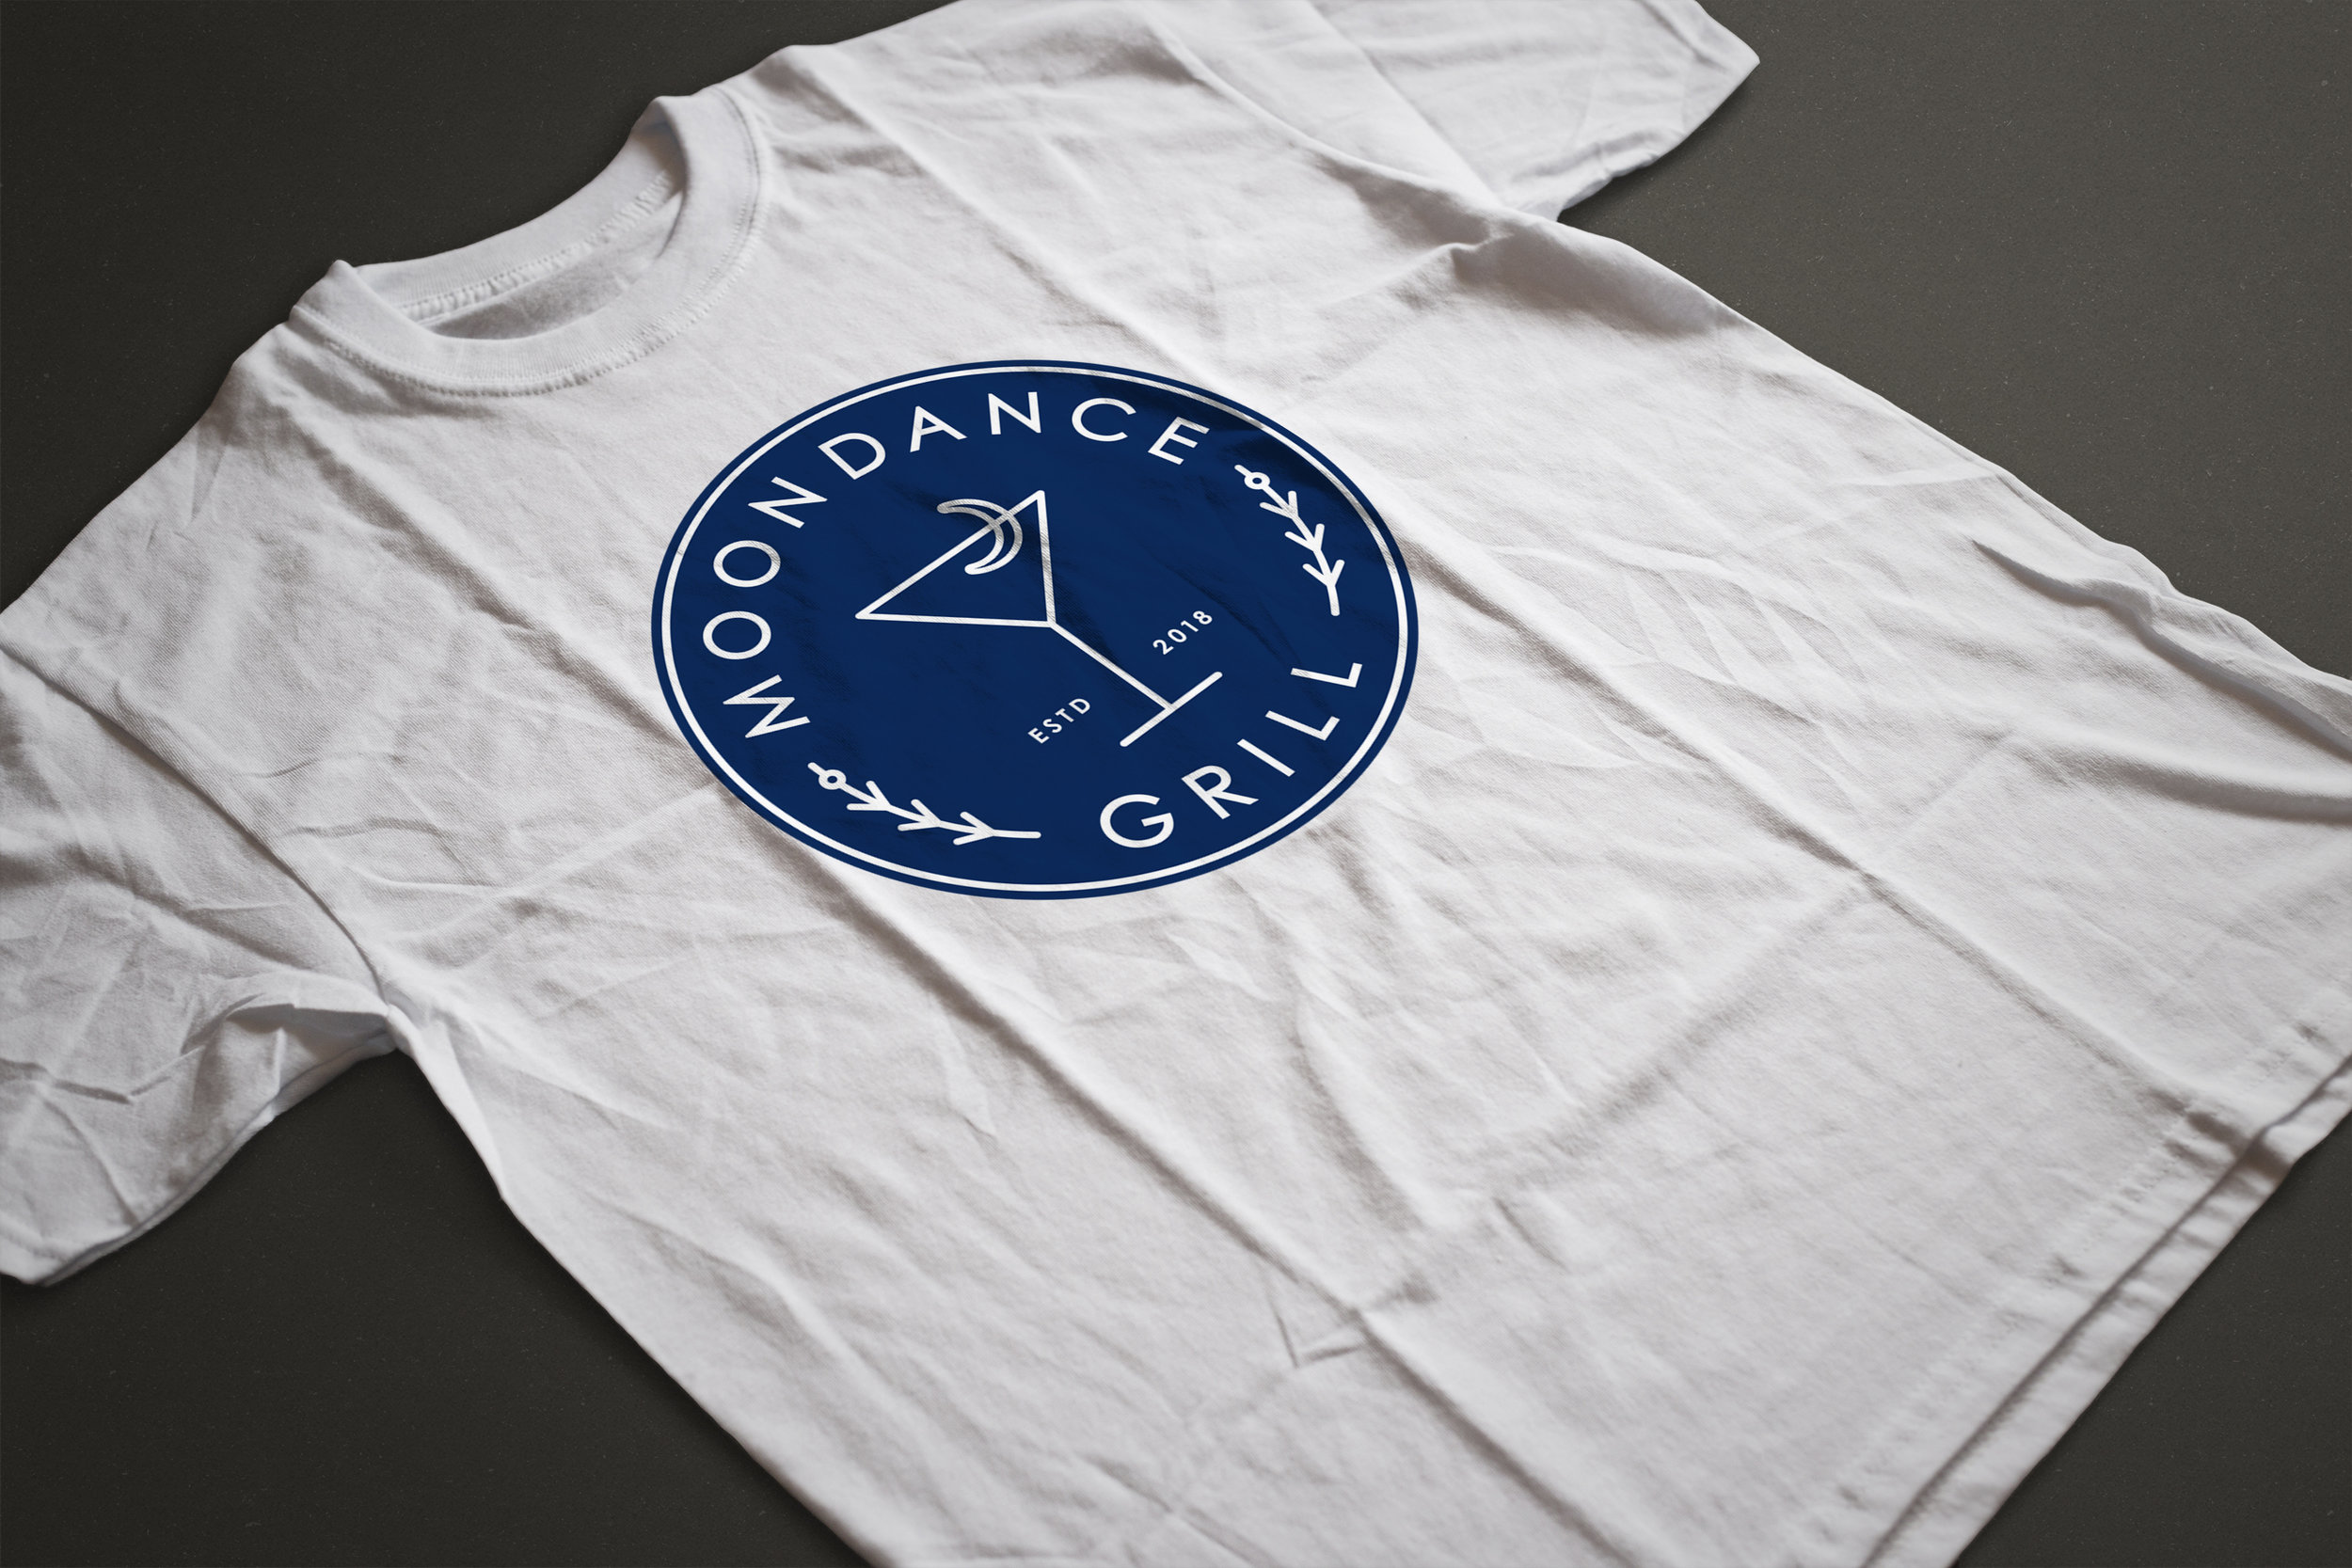  Moondance Grill Germantown Thornwood Prototype Logo Tee  for Tommy Peters, Beale Street Blues Company Memphis  Name development, branding creative and design by Chuck Mitchell 